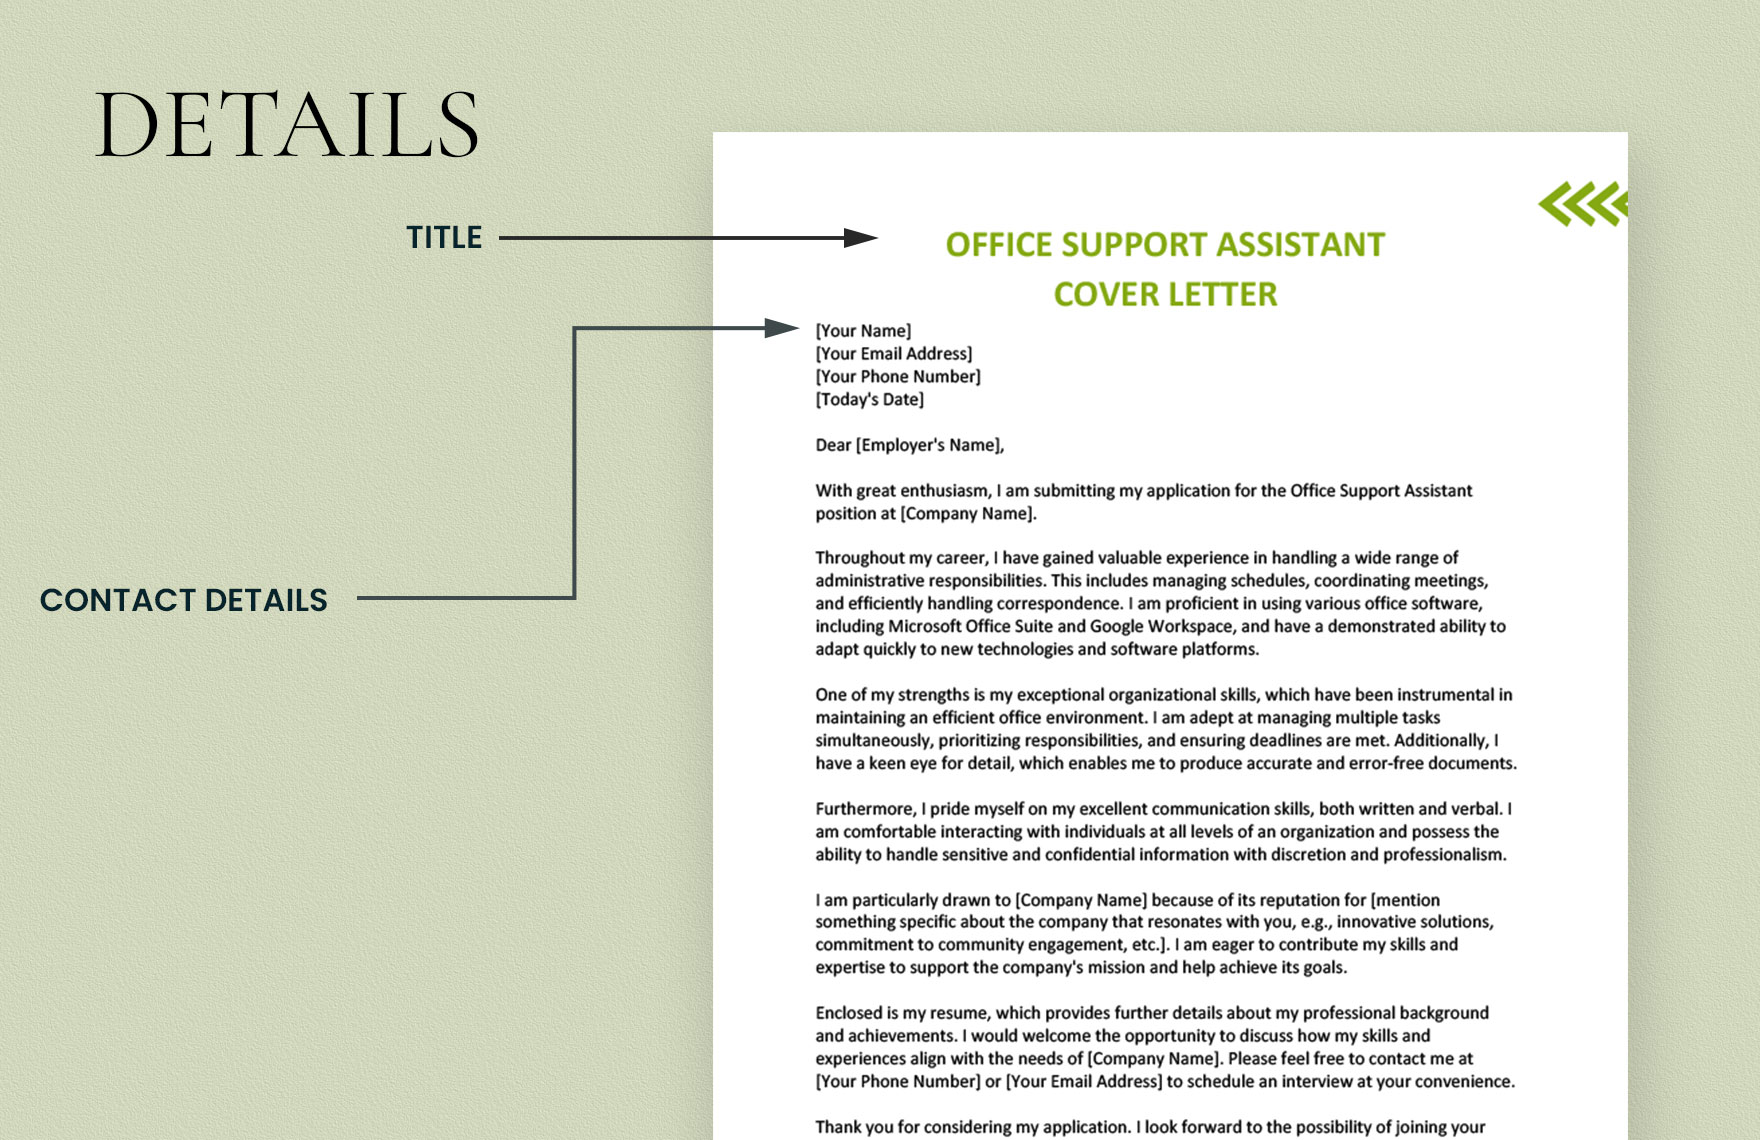 Office Support Assistant Cover Letter